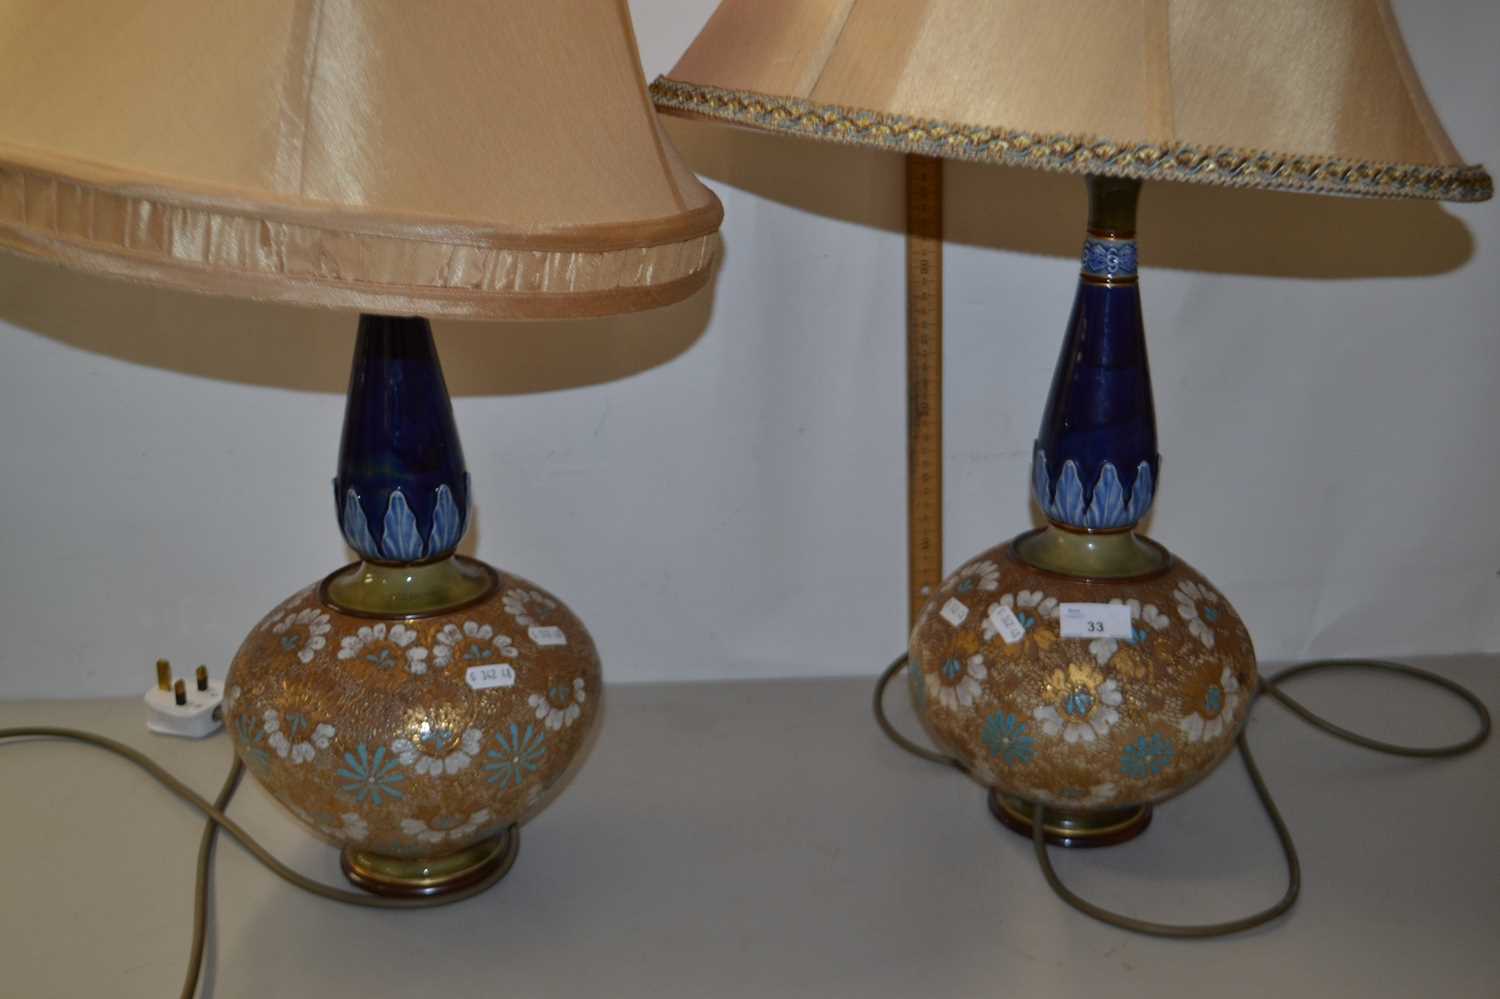 Pair of Royal Doulton stone ware vases converted to table lamps